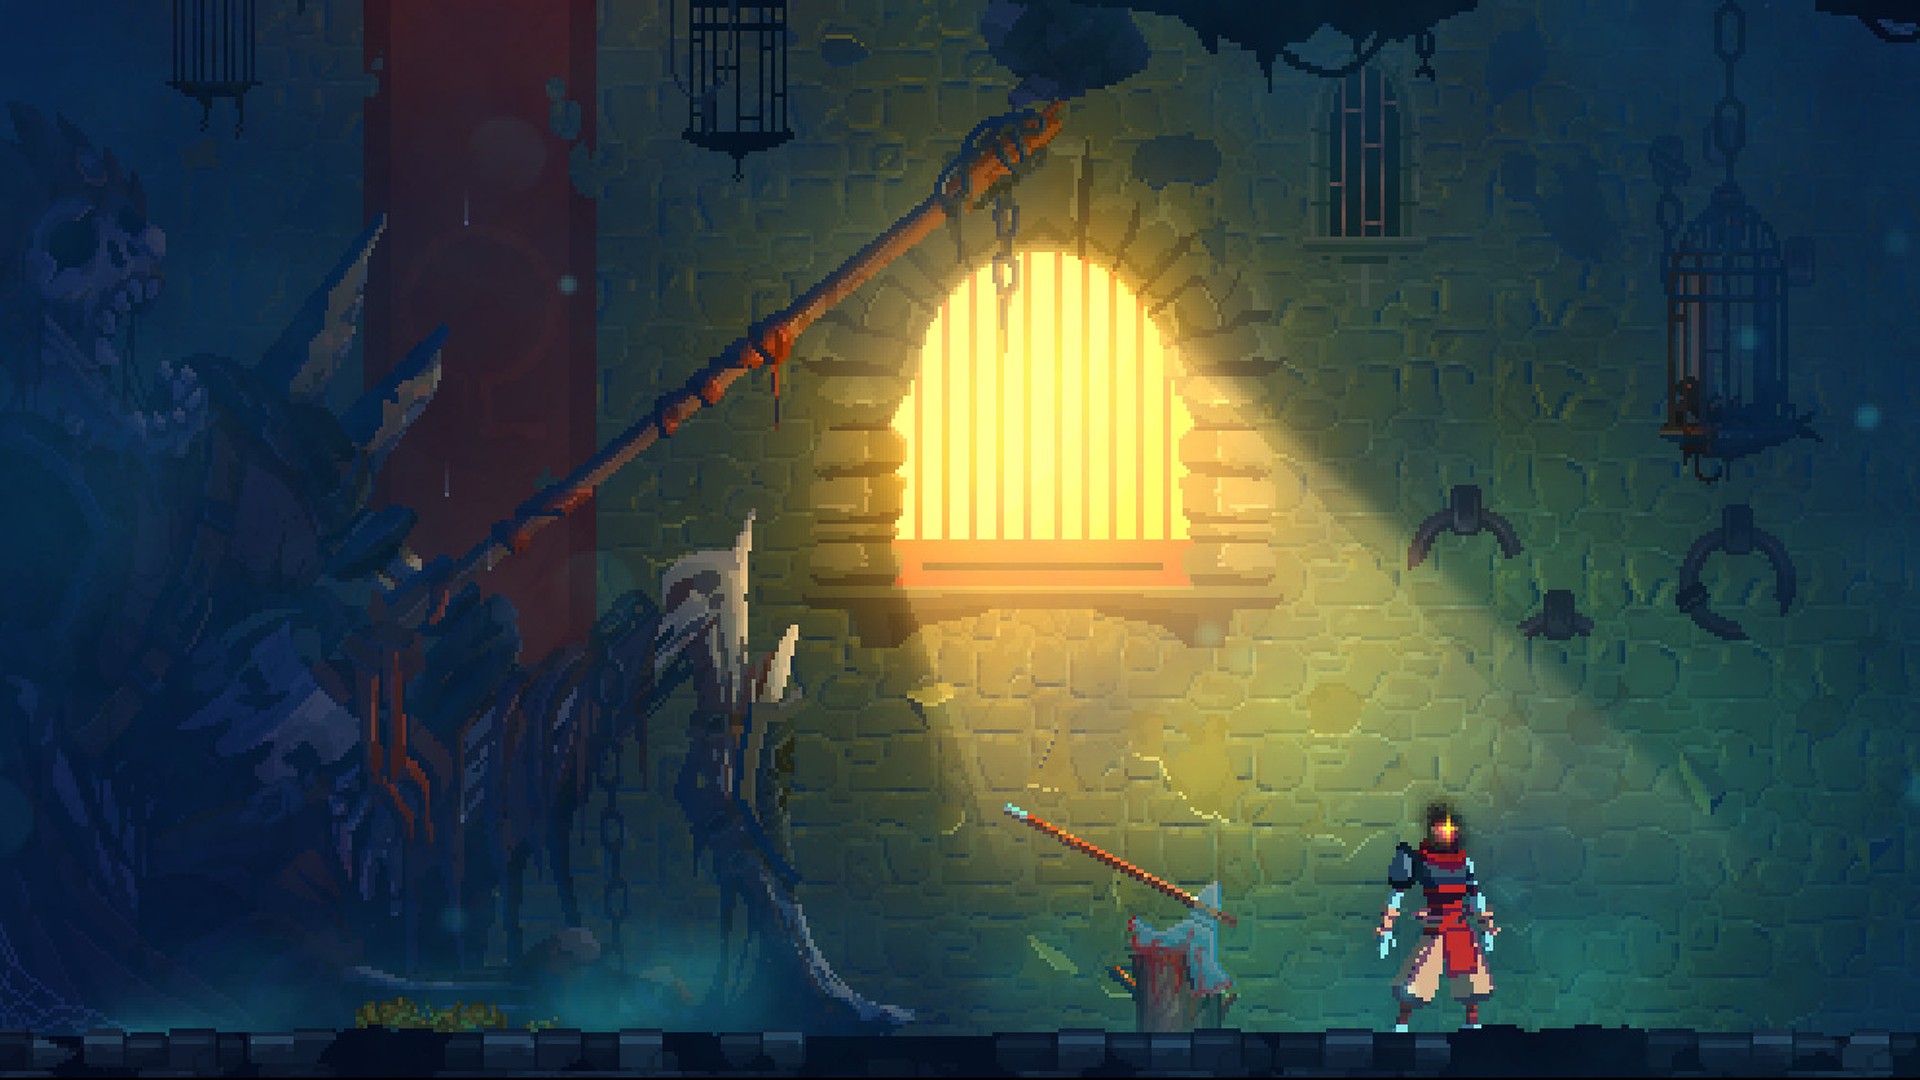 From Tower Defense to Roguevania: The Creation of Dead Cells, Available August 7 on Xbox One